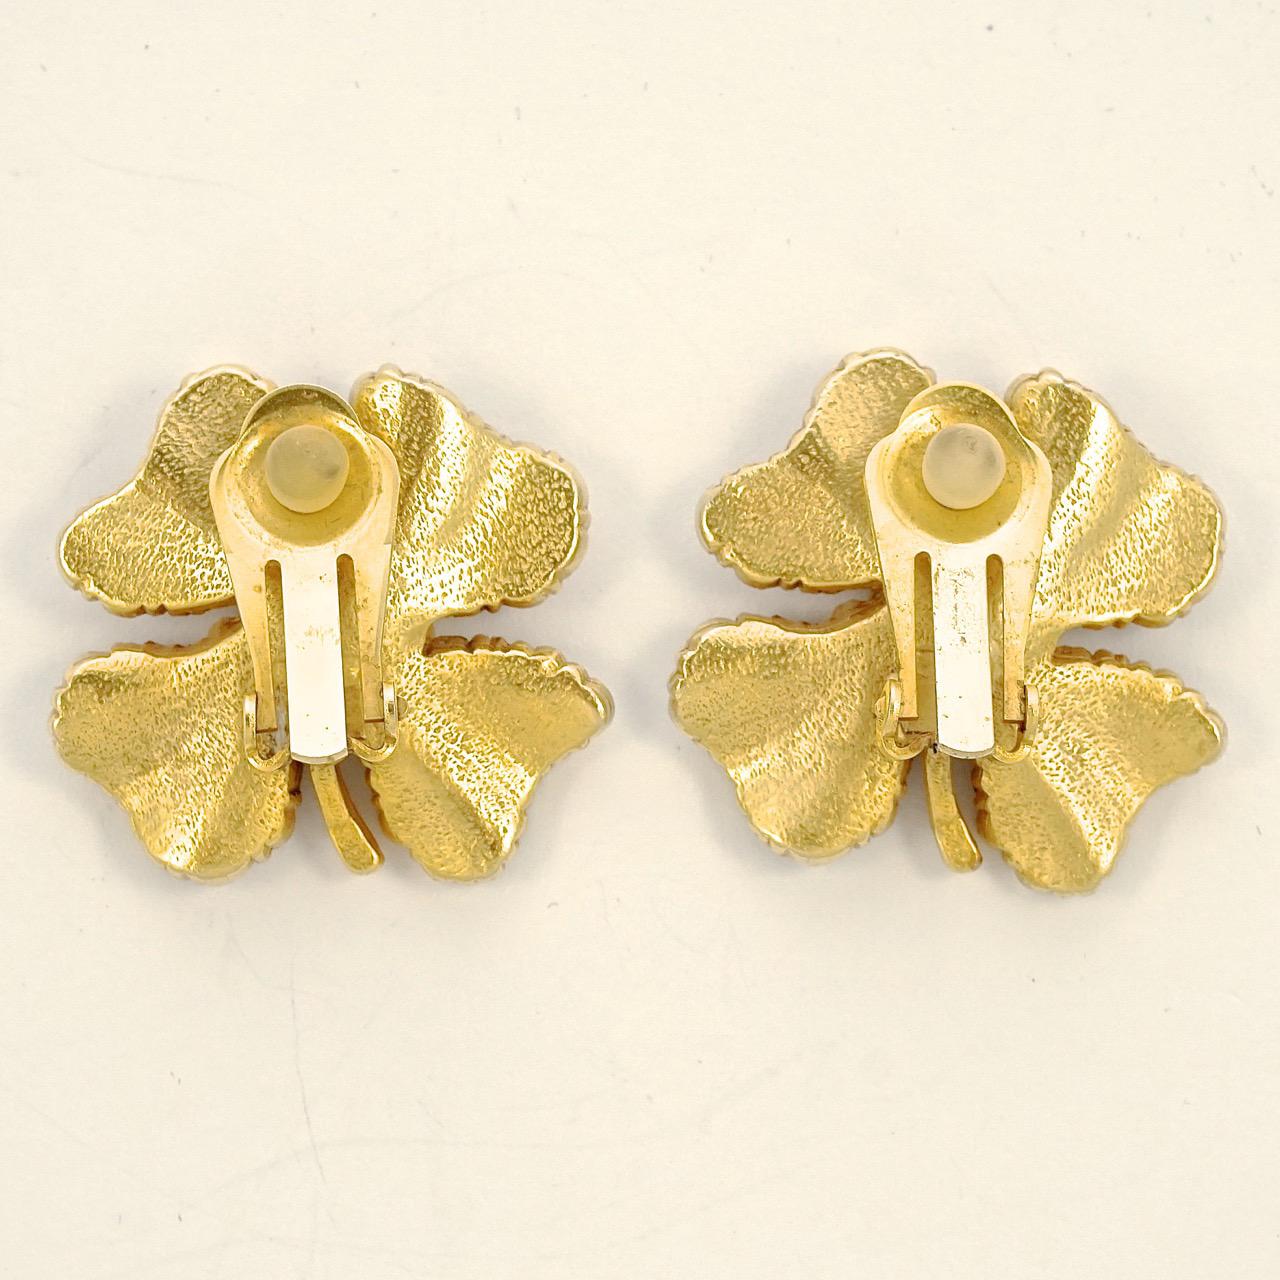 Butler & Wilson Gold Tone Flower Brooch and Earrings with Crystals 1